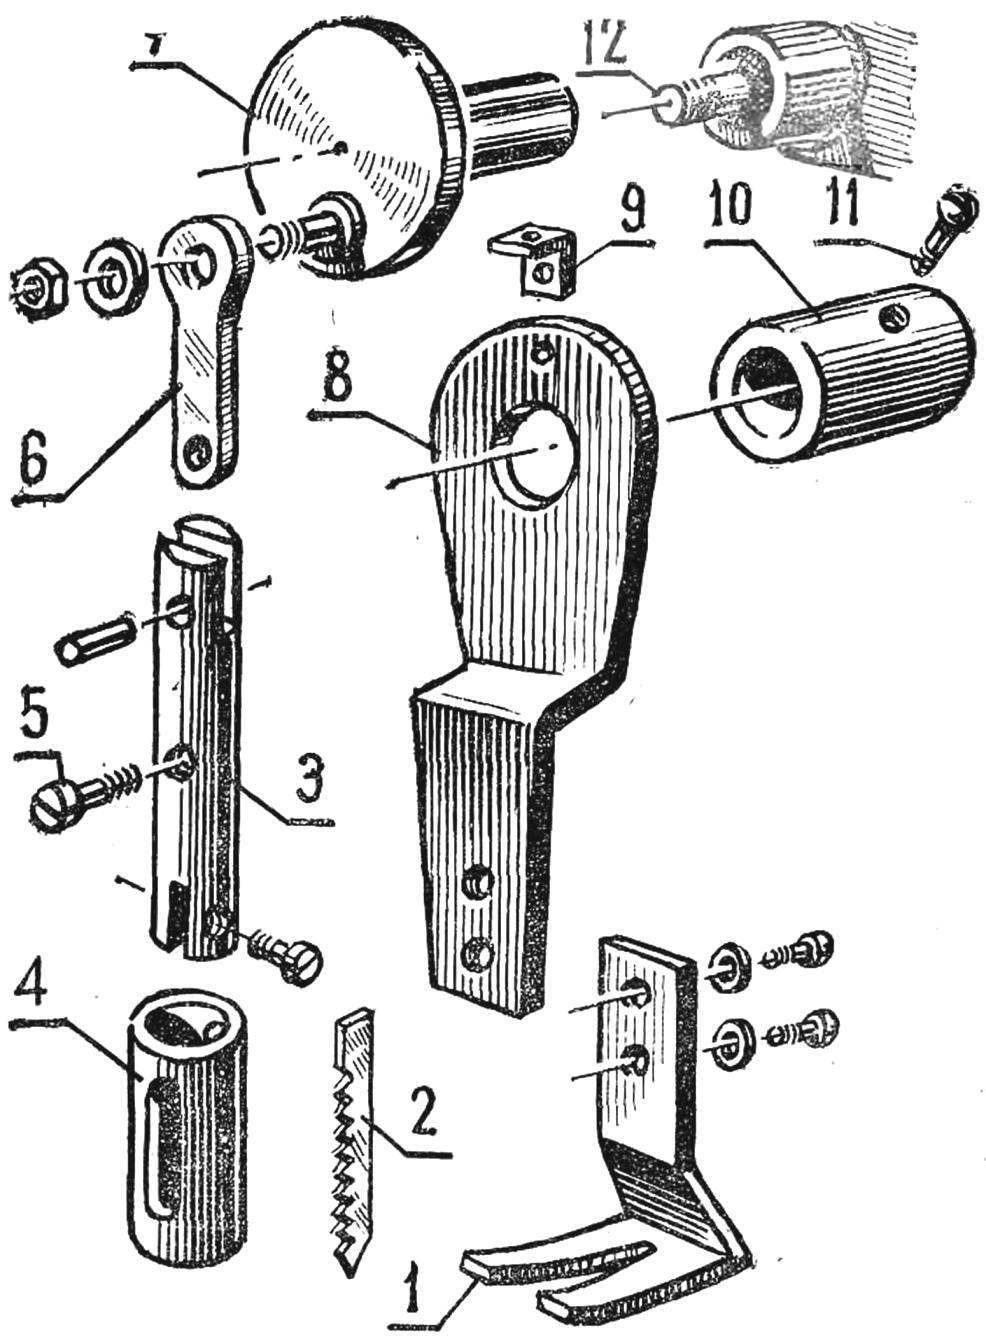 Fig. 3. Details of drill jigsaw